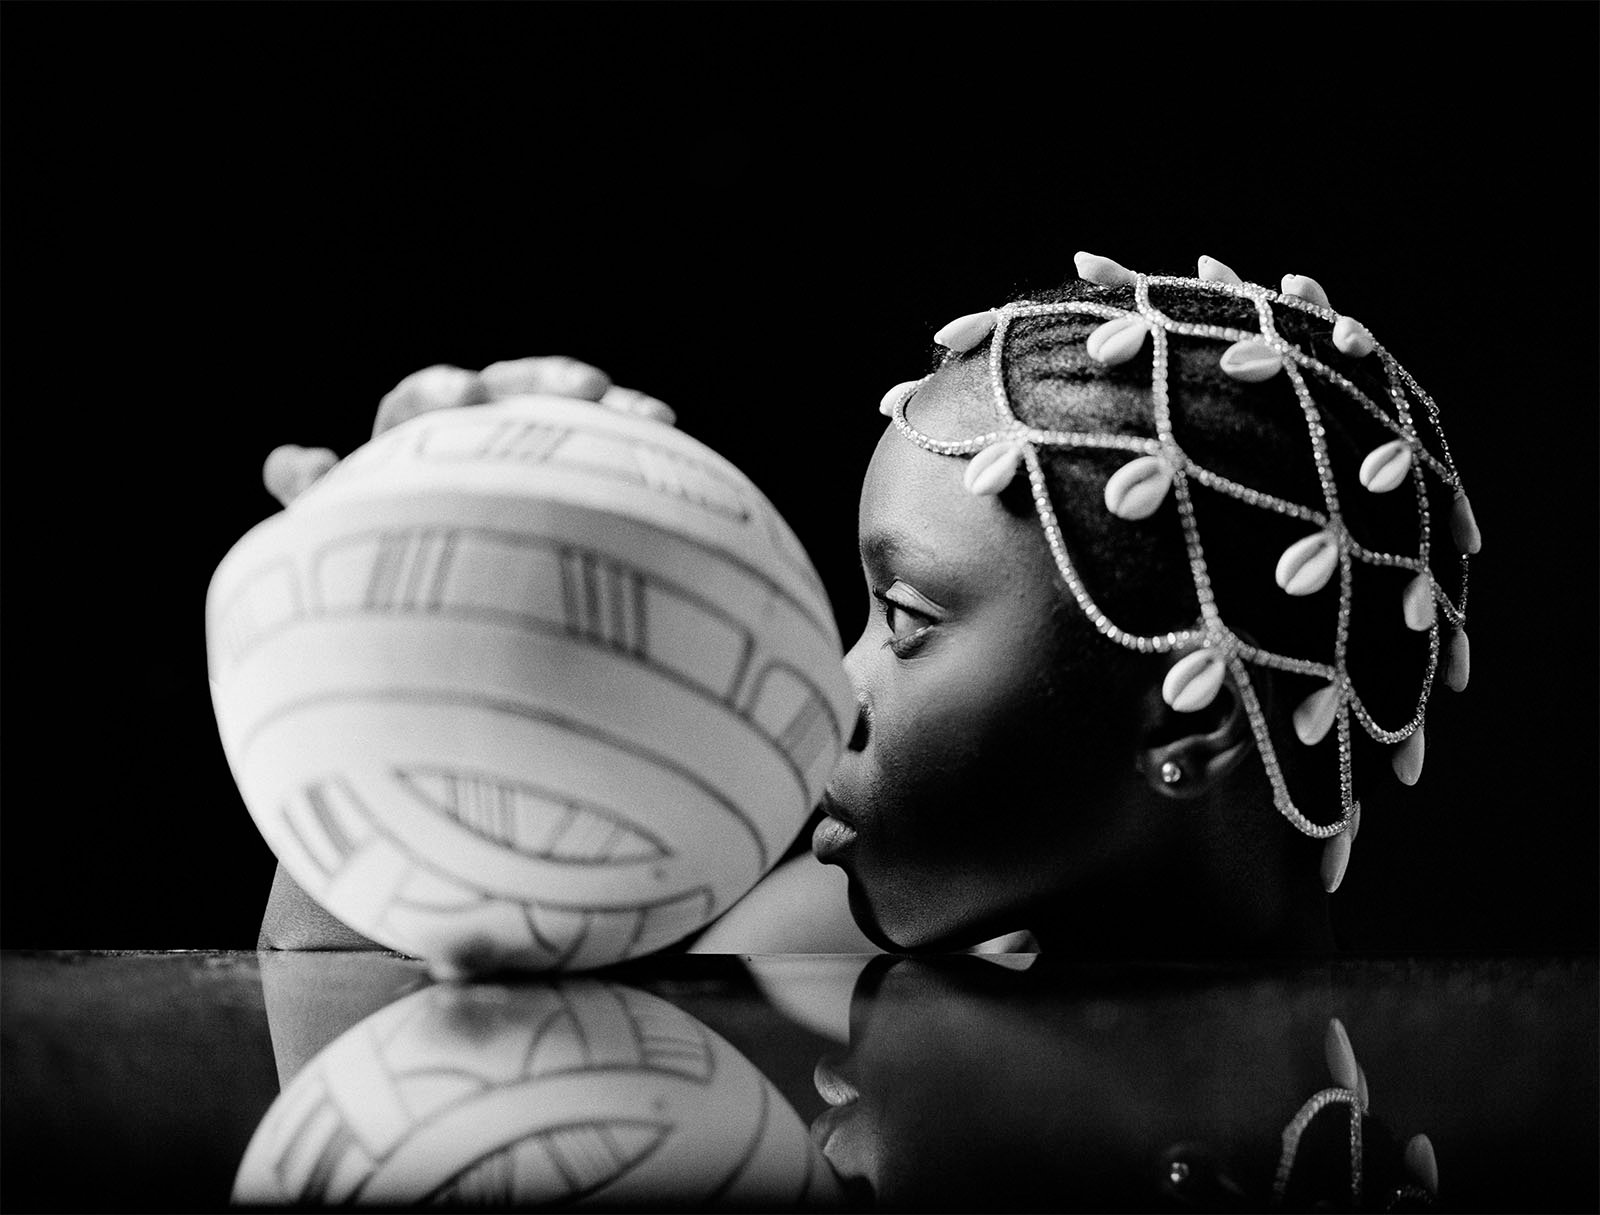 A black and white photo of a child with decorative beads in her hair touching noses with a striped, textured ball, both reflected on a glossy surface.